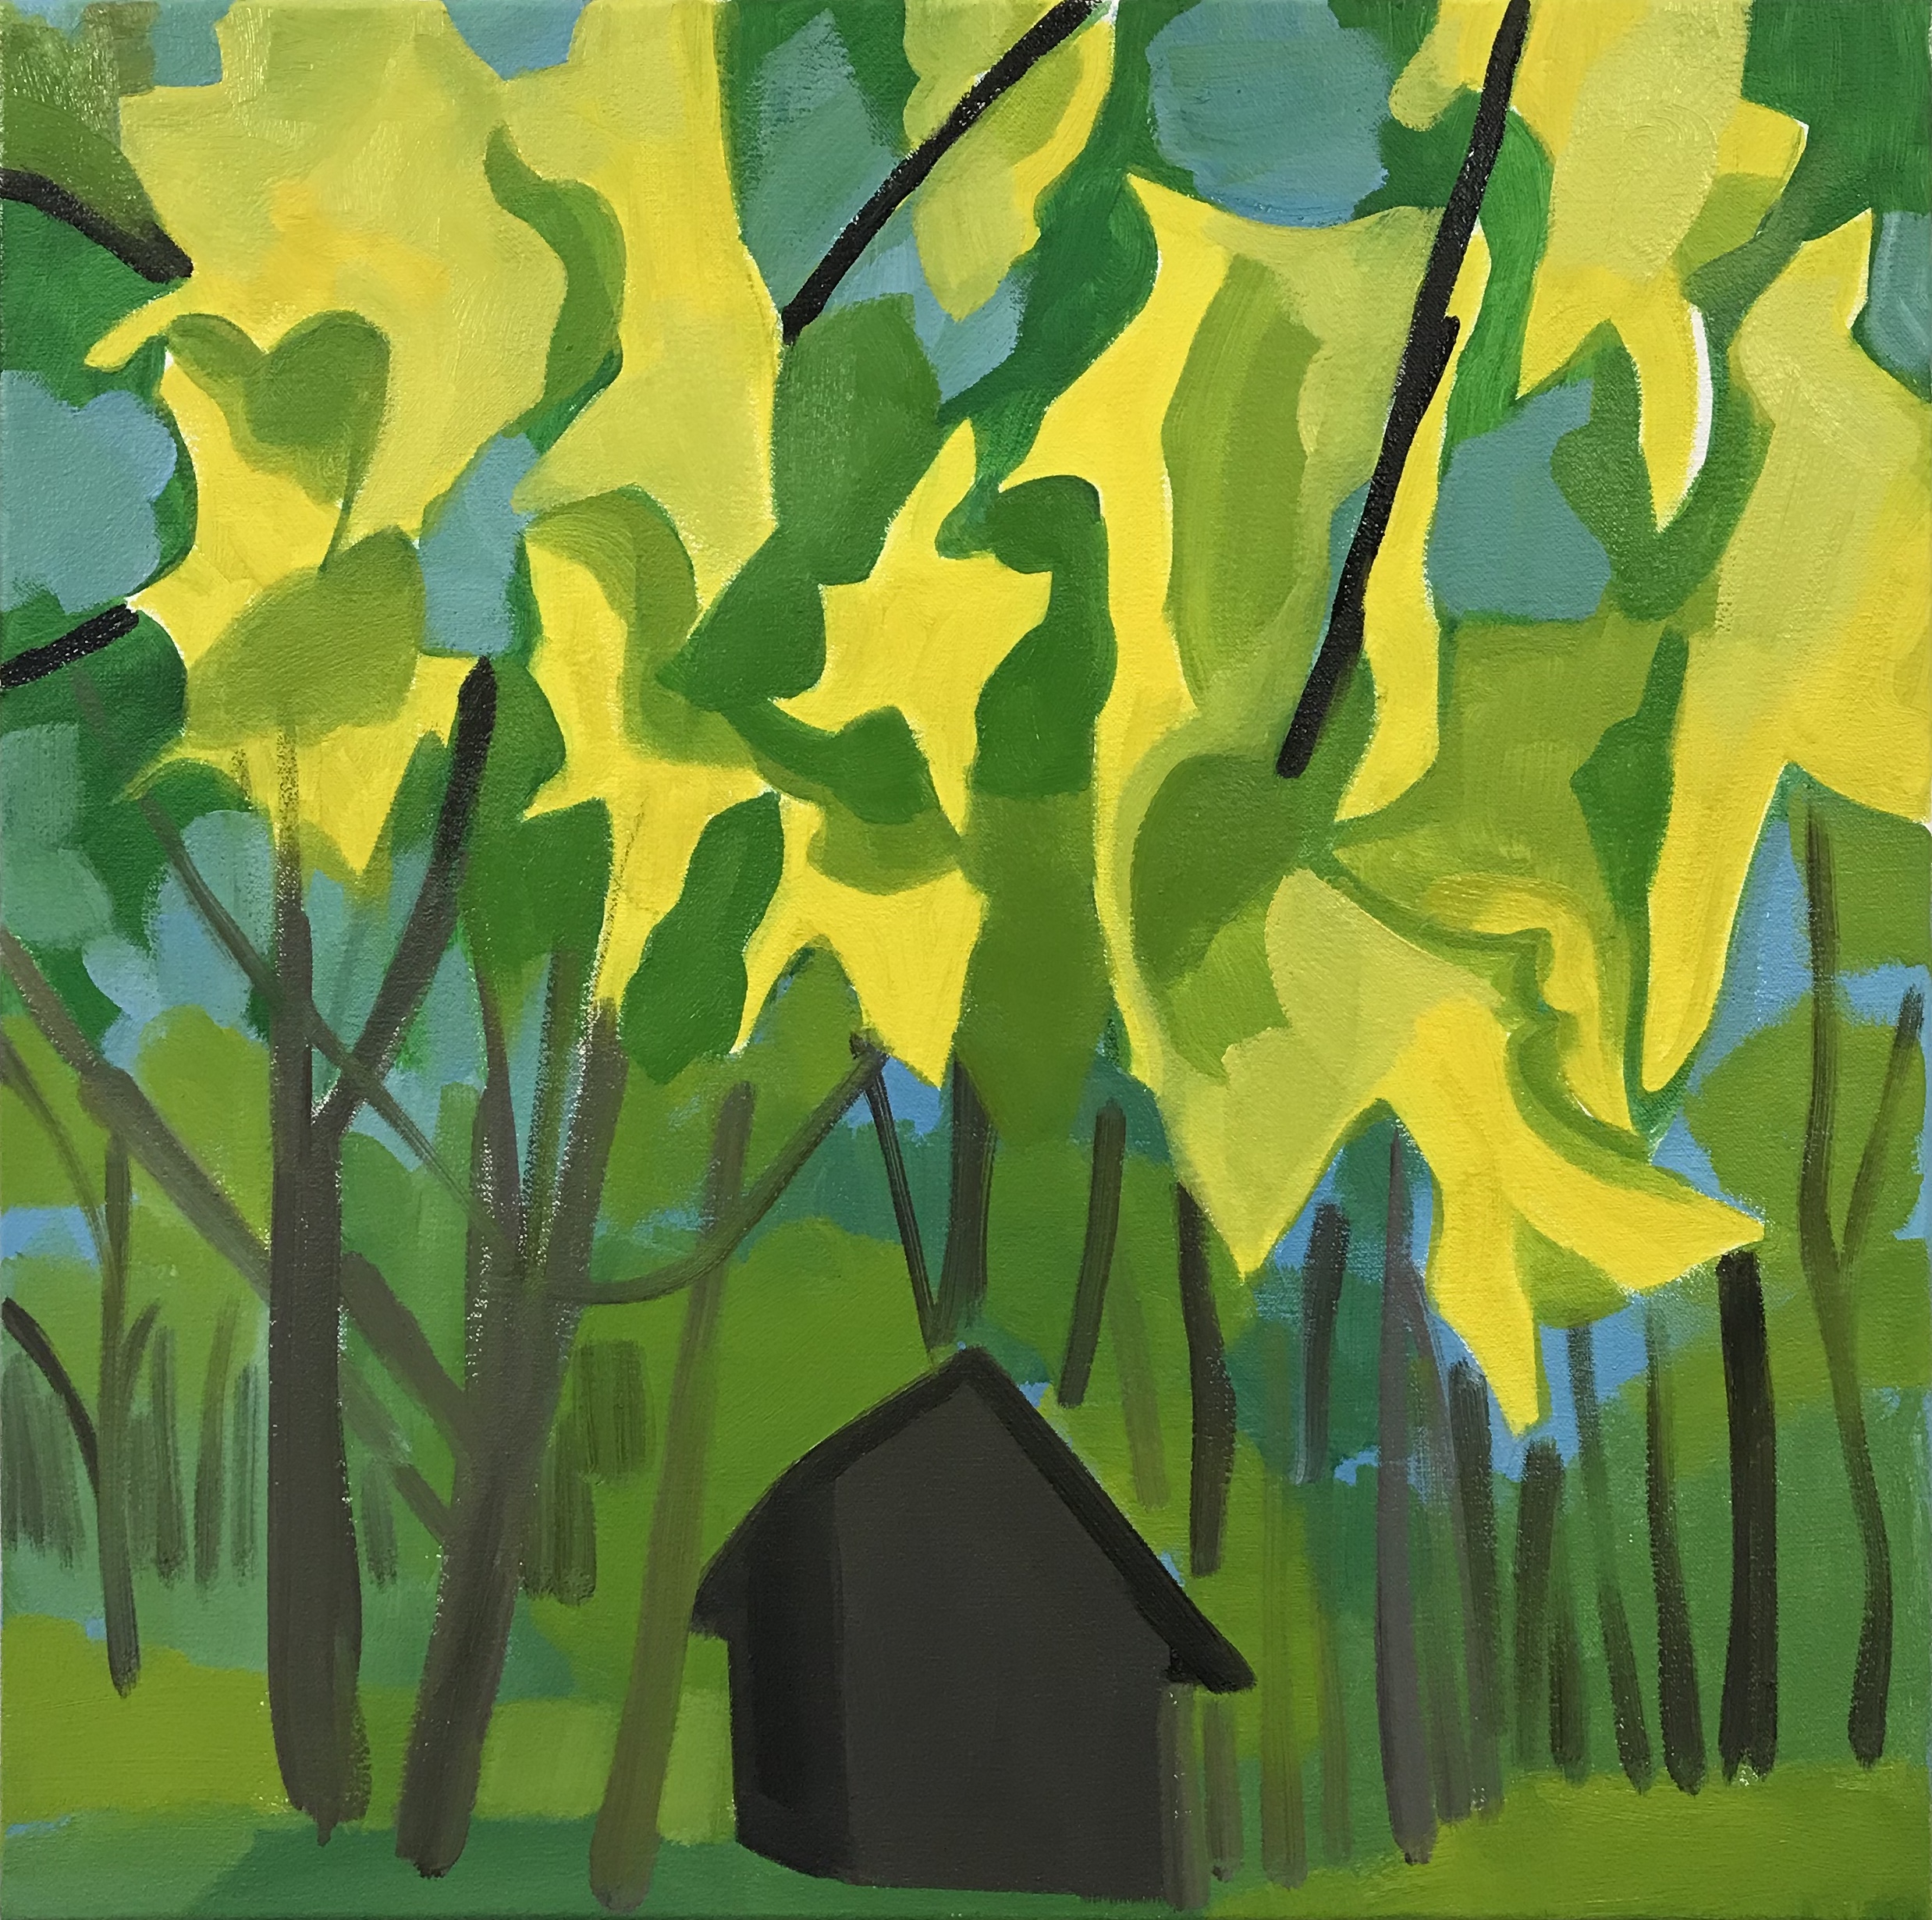 Cabin with big leaves